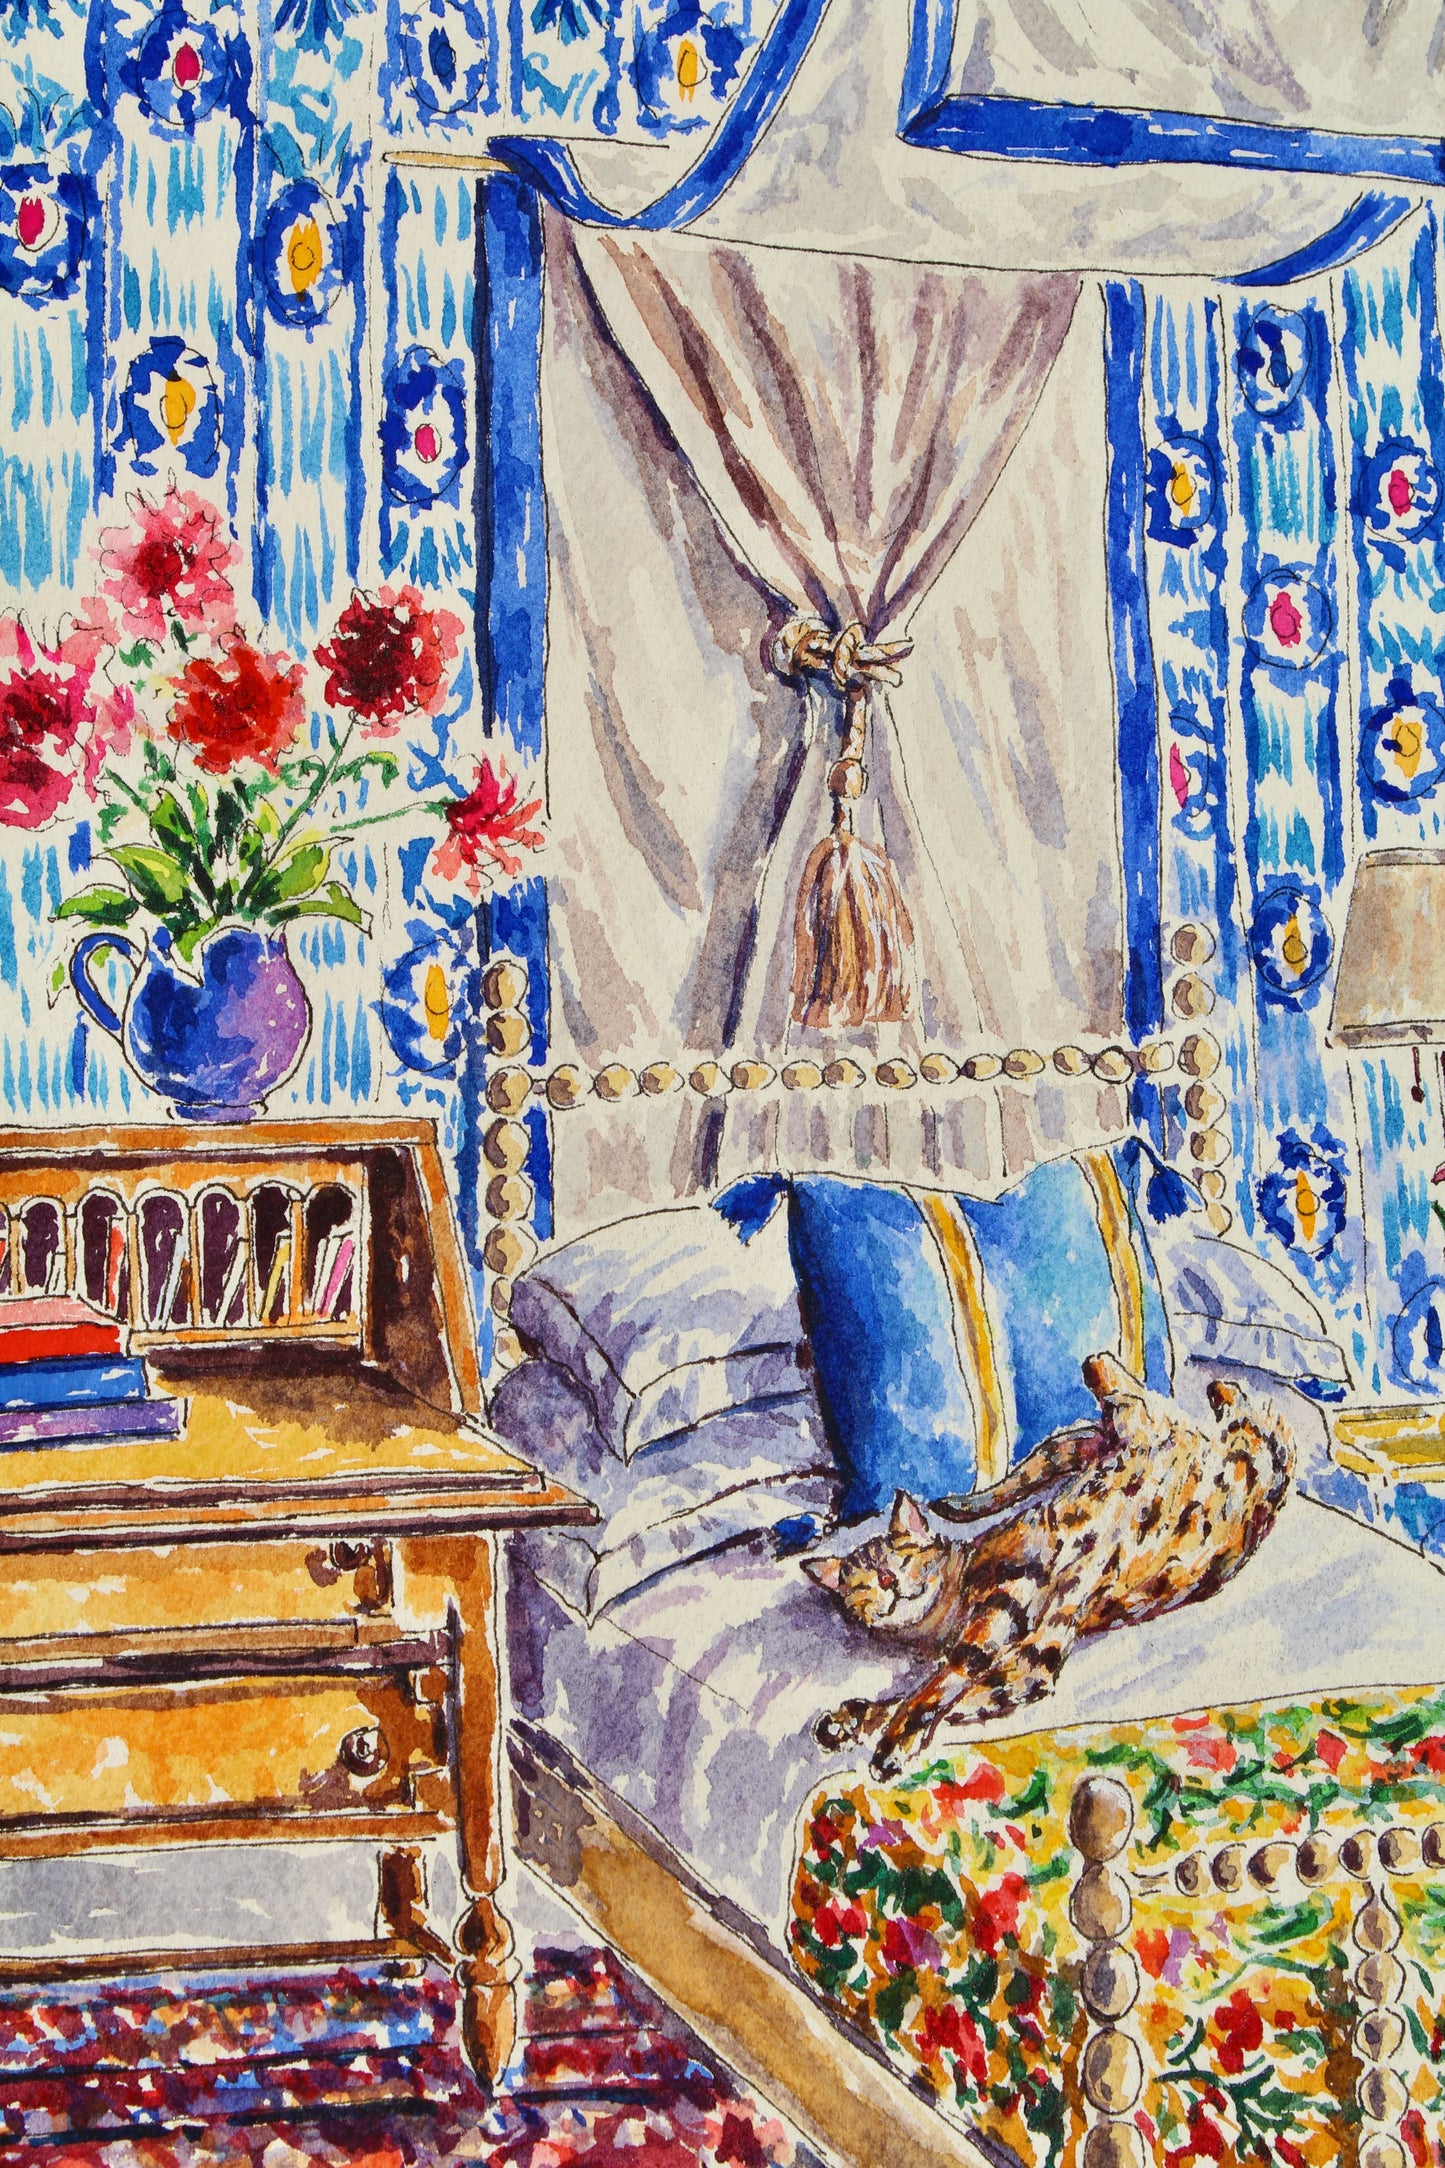 What's Blue Pussycat?, An Original 14" x 10" Watercolor And Ink Painting Of A Maximalist Designed Room With A Bengal Cat